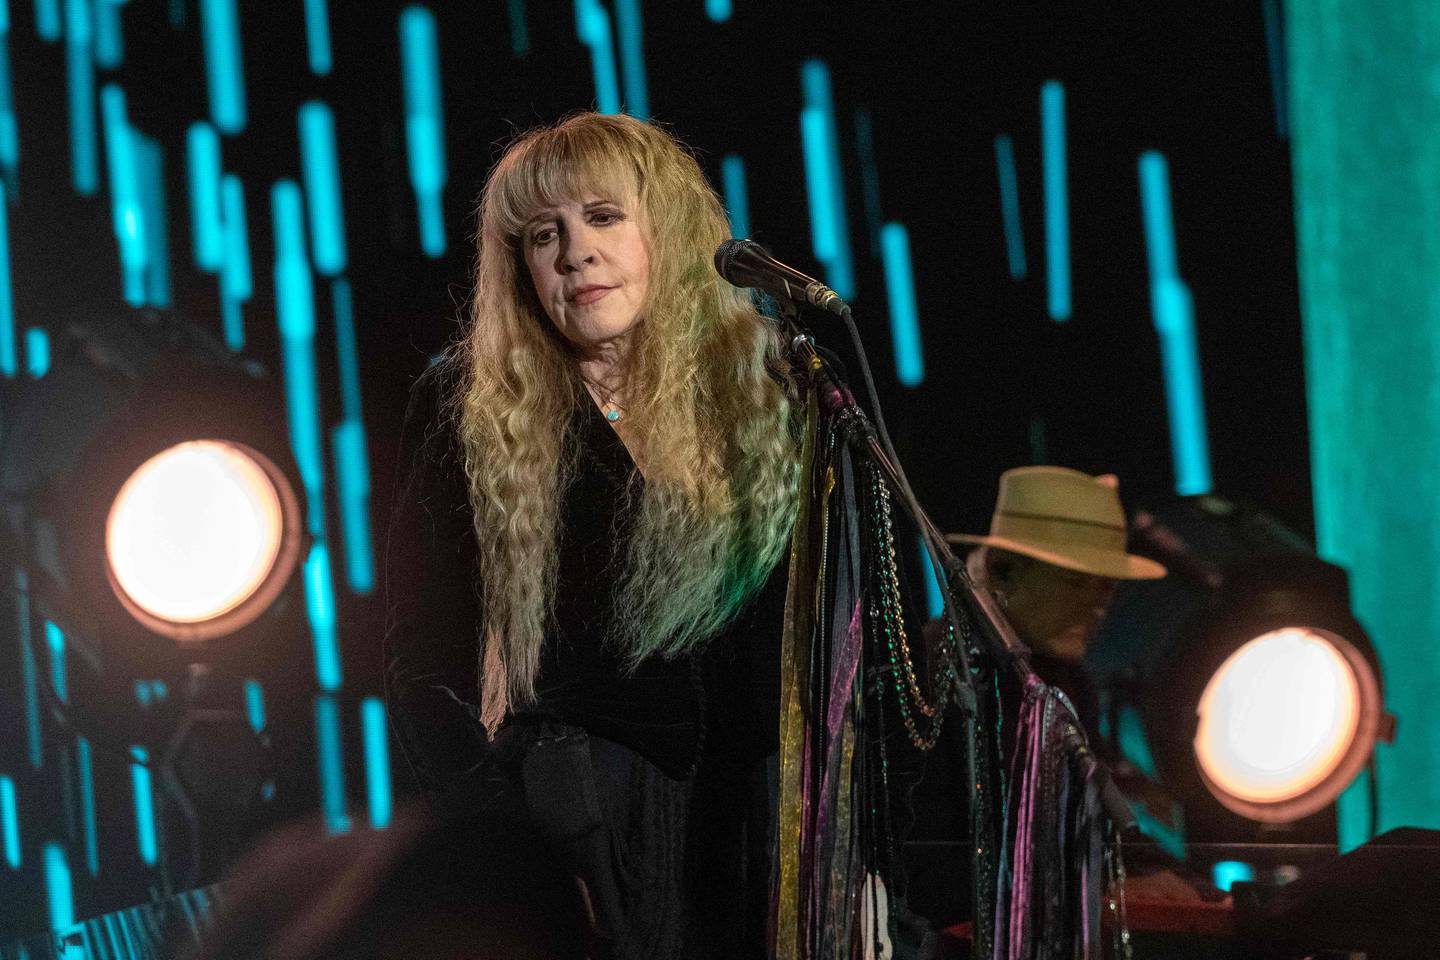 Stevie Nicks sold a majority stake in her music rights for $100 million last year. AFP
